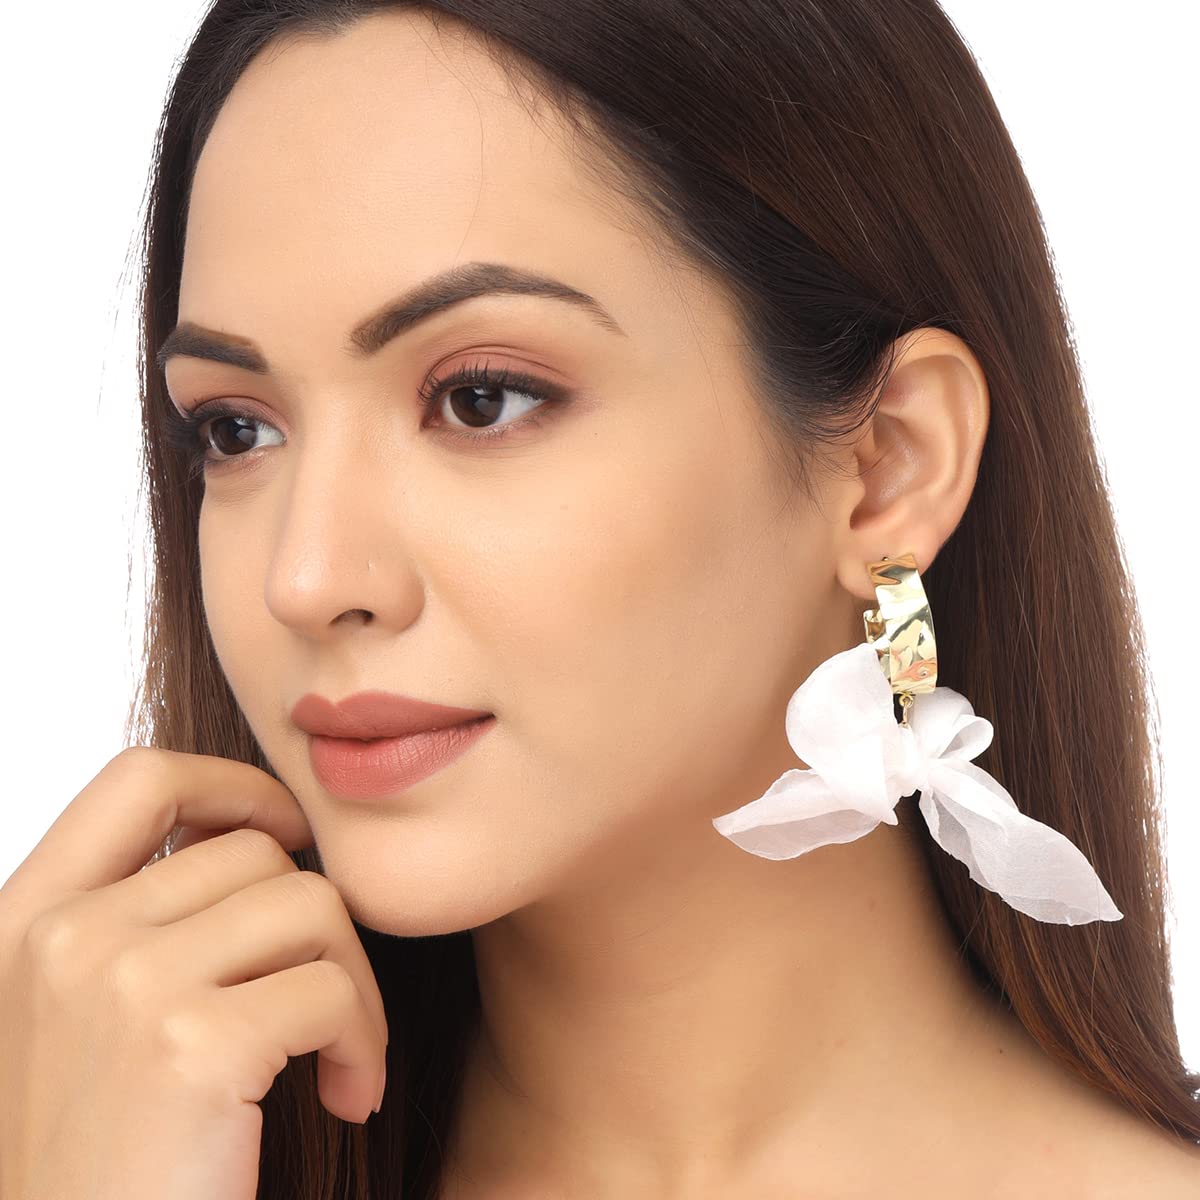 Yellow Chimes Earrings For Women White Colored Cloth Woven Bow Shaped Drop Earrings For Women and Girls